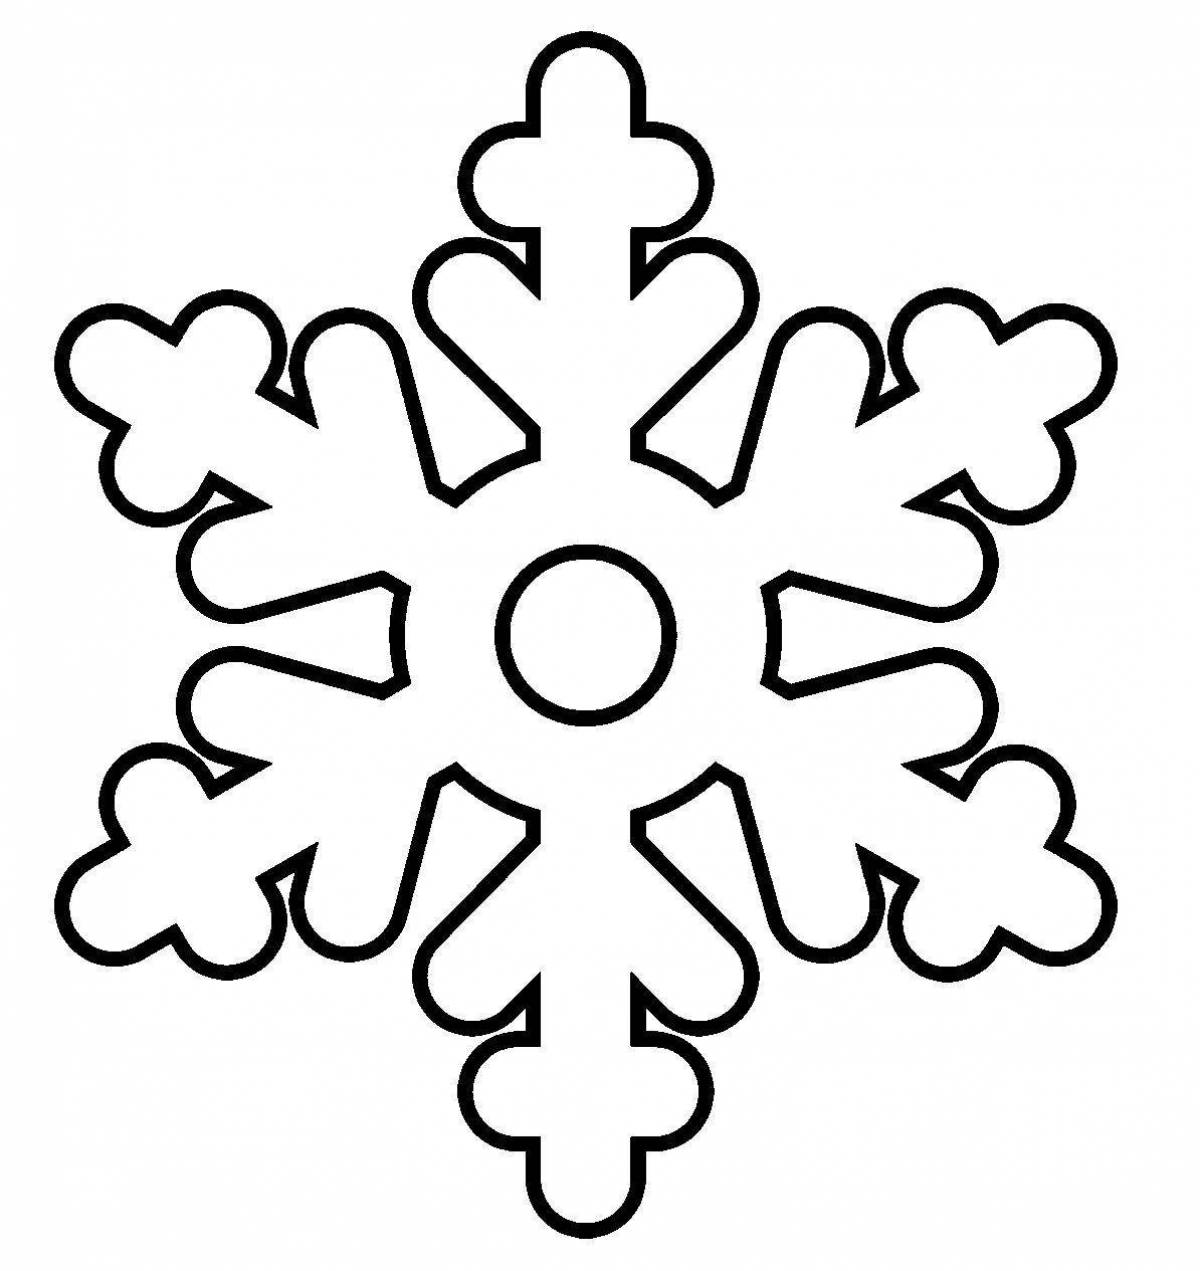 Magic snowflake coloring page for kids